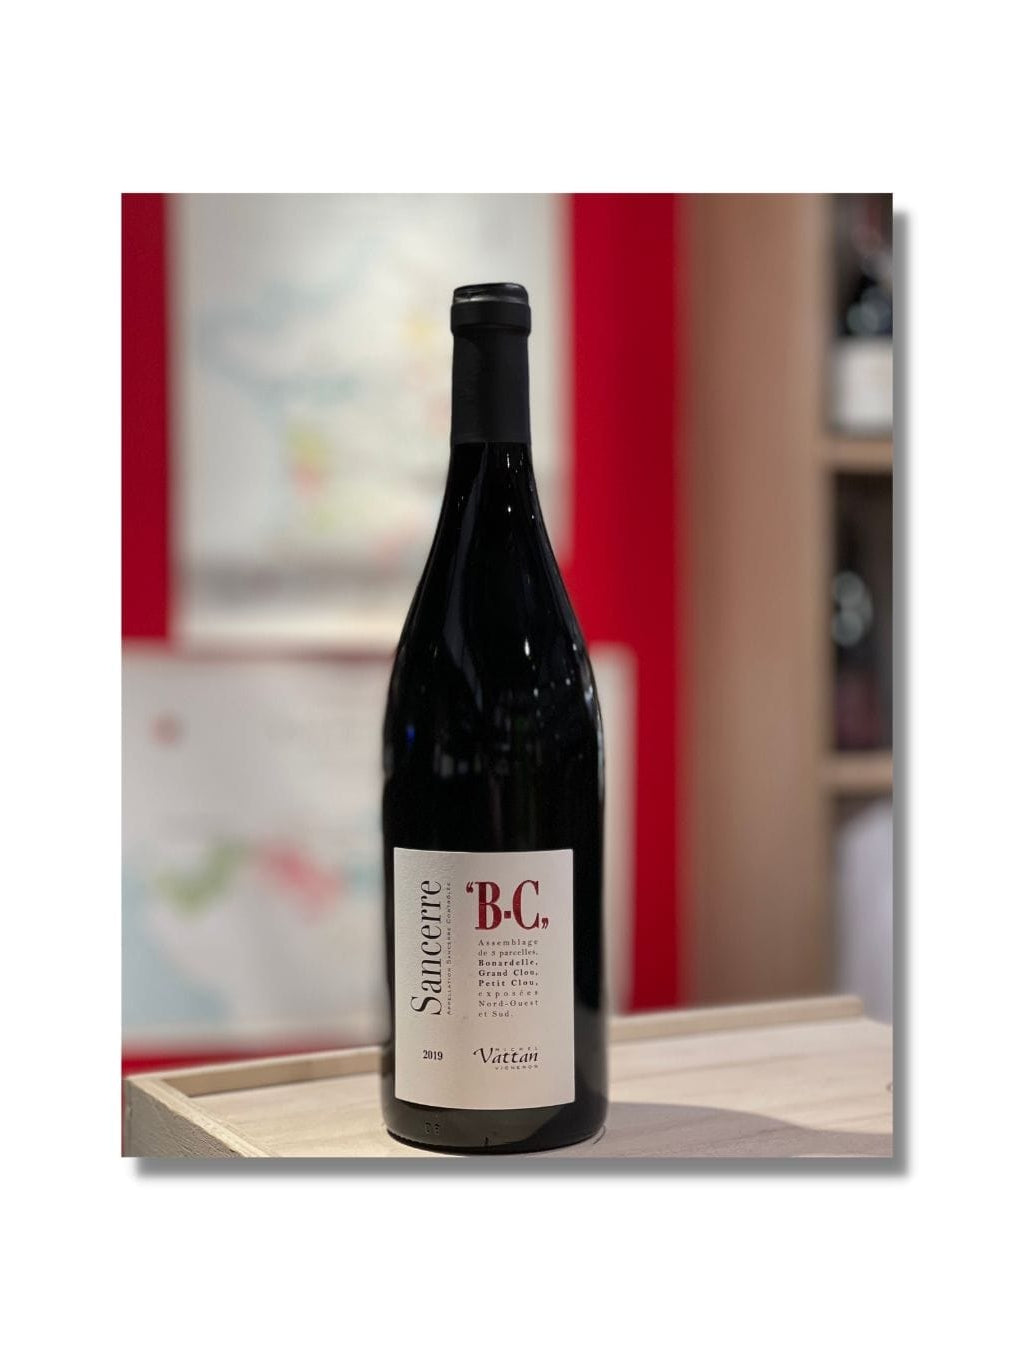 Shop Domaine Michel Vattan Domaine Michel Vattan Sancerre Rouge Cuvée B-C 2019 online at PENTICTON artisanal French wine store in Hong Kong. Discover other French wines, promotions, workshops and featured offers at pentictonpacific.com 